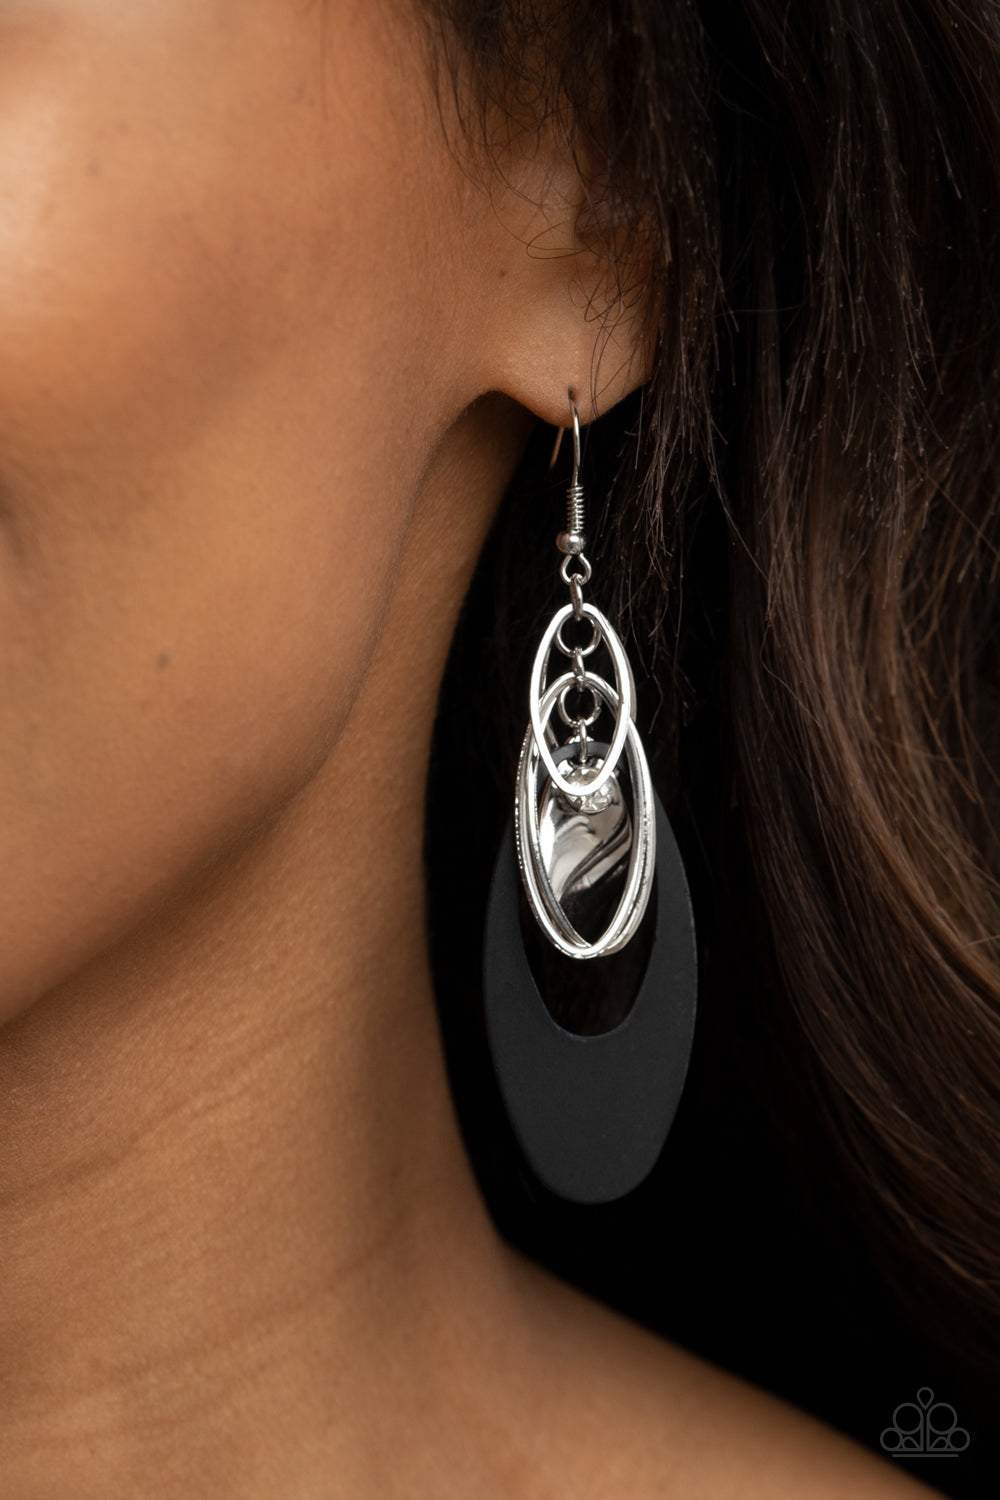 Ambitious Allure Black Earring - Paparazzi Accessories. Infused with a glassy white rhinestone, shiny silver ovals, a twisted silver plate, and an oversized black frame trickle along a shimmery silver chain, creating a noise-making tassel. Earring attaches to a standard fishhook fitting.  All Paparazzi Accessories are lead free and nickel free!  Sold as one pair of earrings.